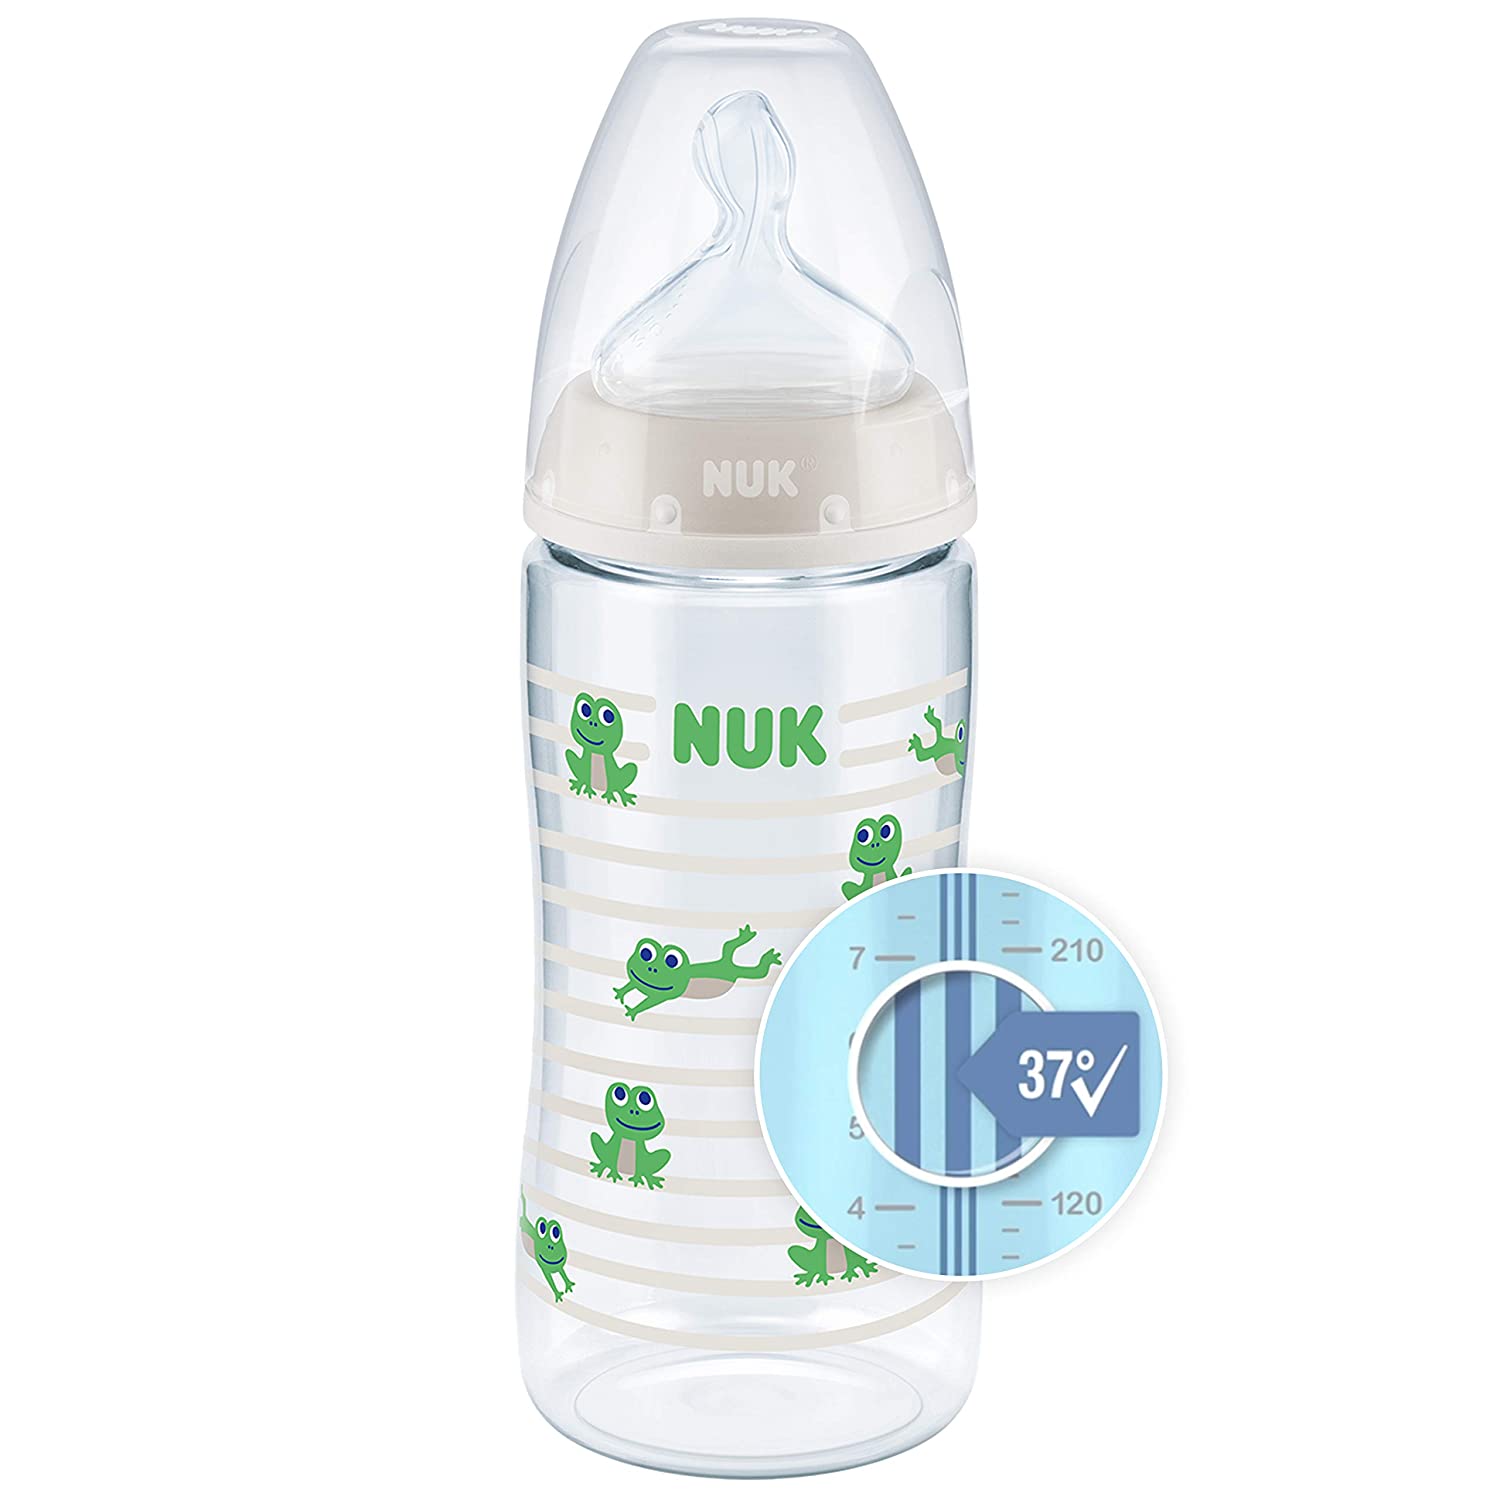 NUK First Choice+ Baby Bottle with Temperature Control Display pink